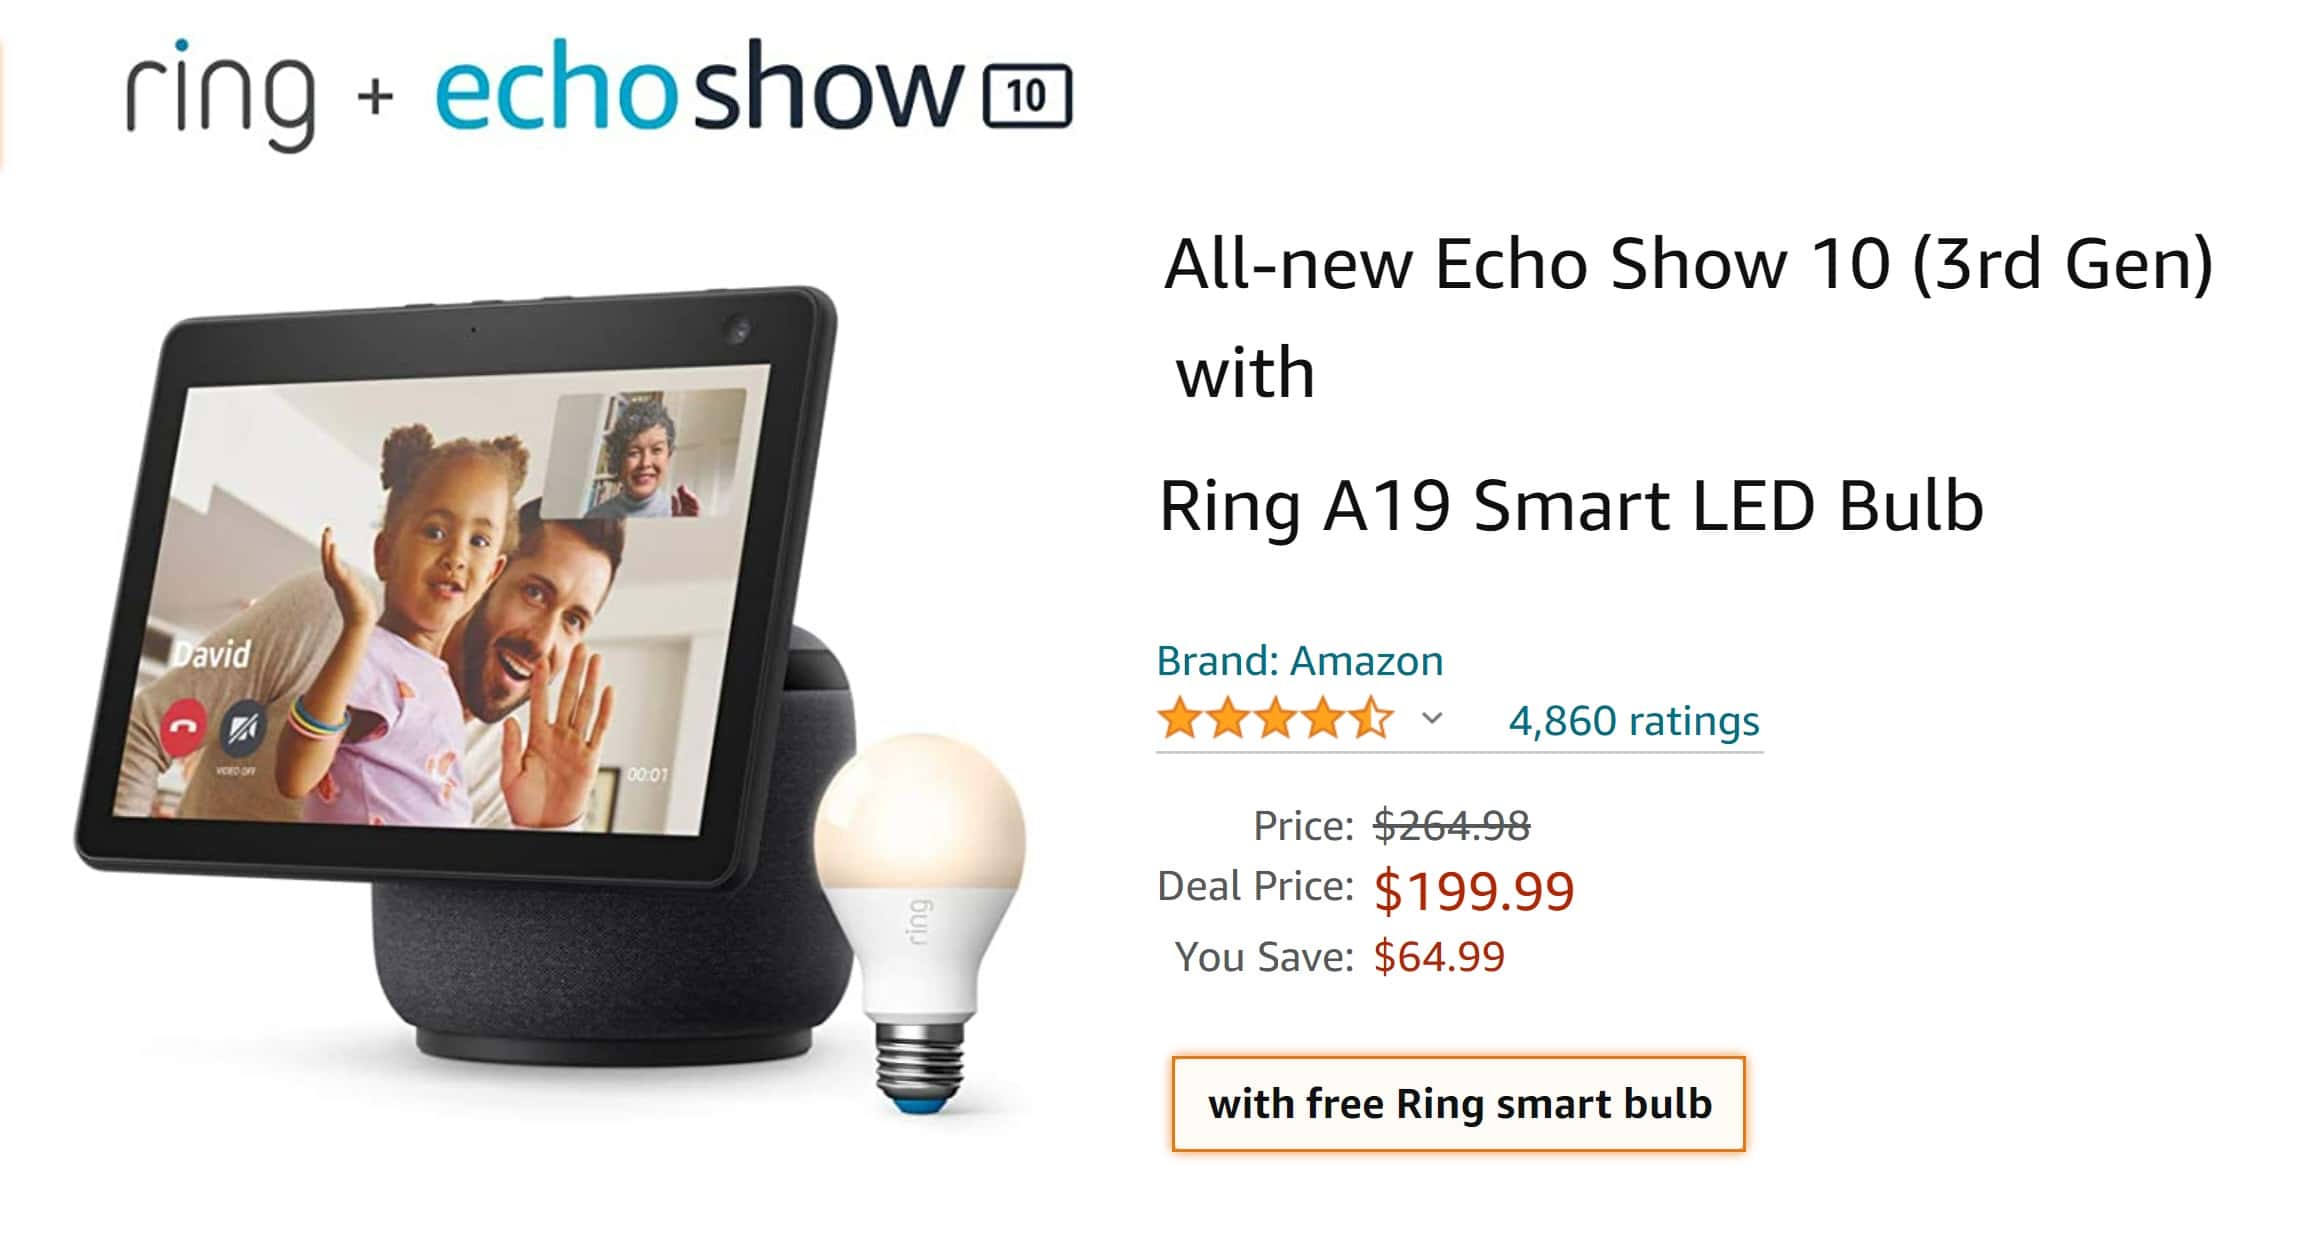 Amazon’s new Echo Show 10 which will turn to face you when you speak deeply discounted